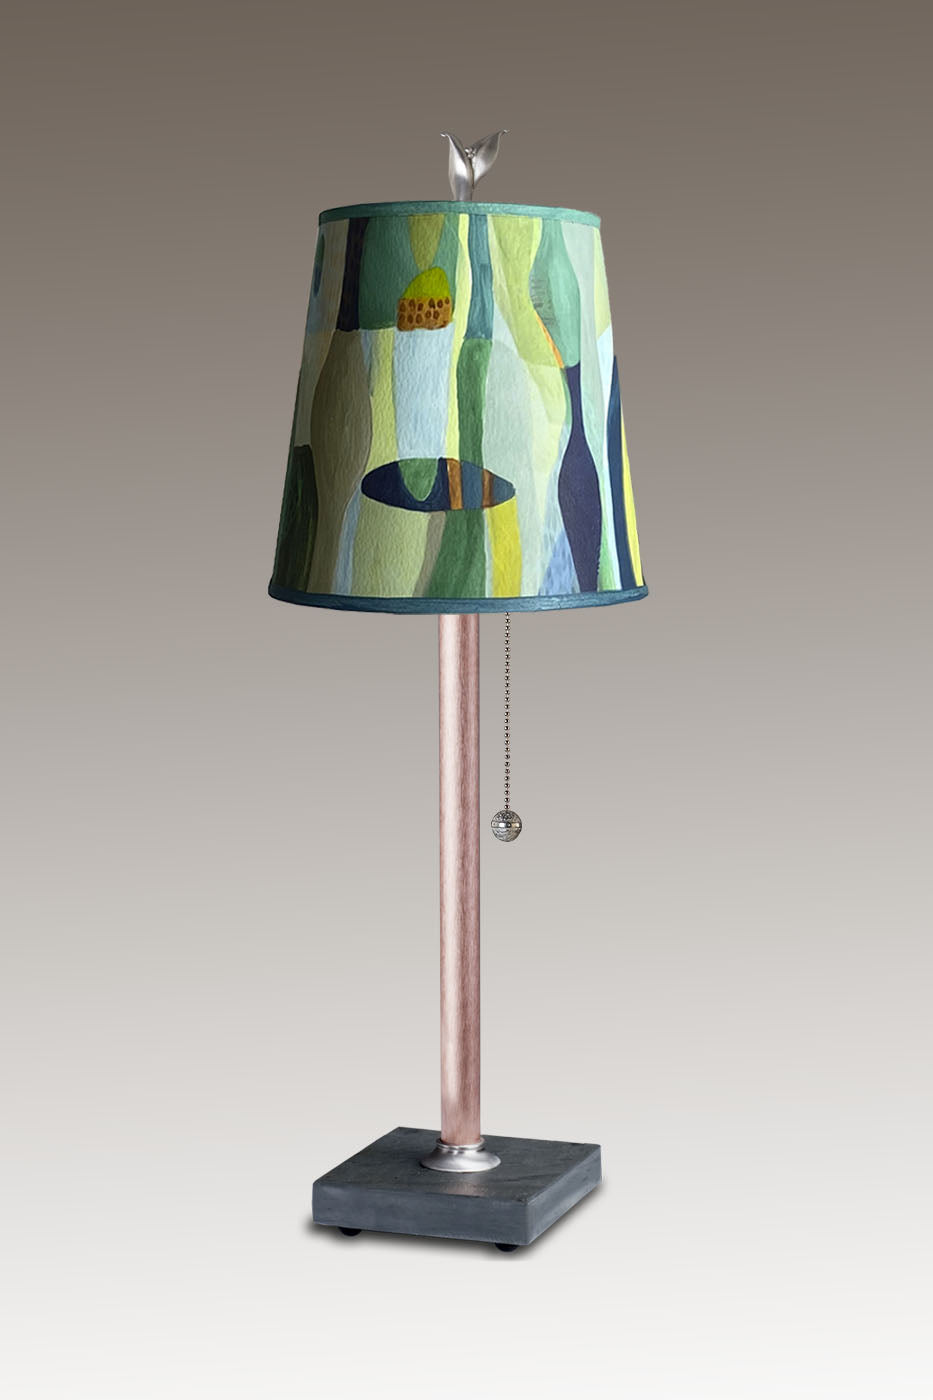 Janna Ugone &amp; Co Table Lamp Copper Table Lamp with Small Drum Shade in Riviera in Citrus